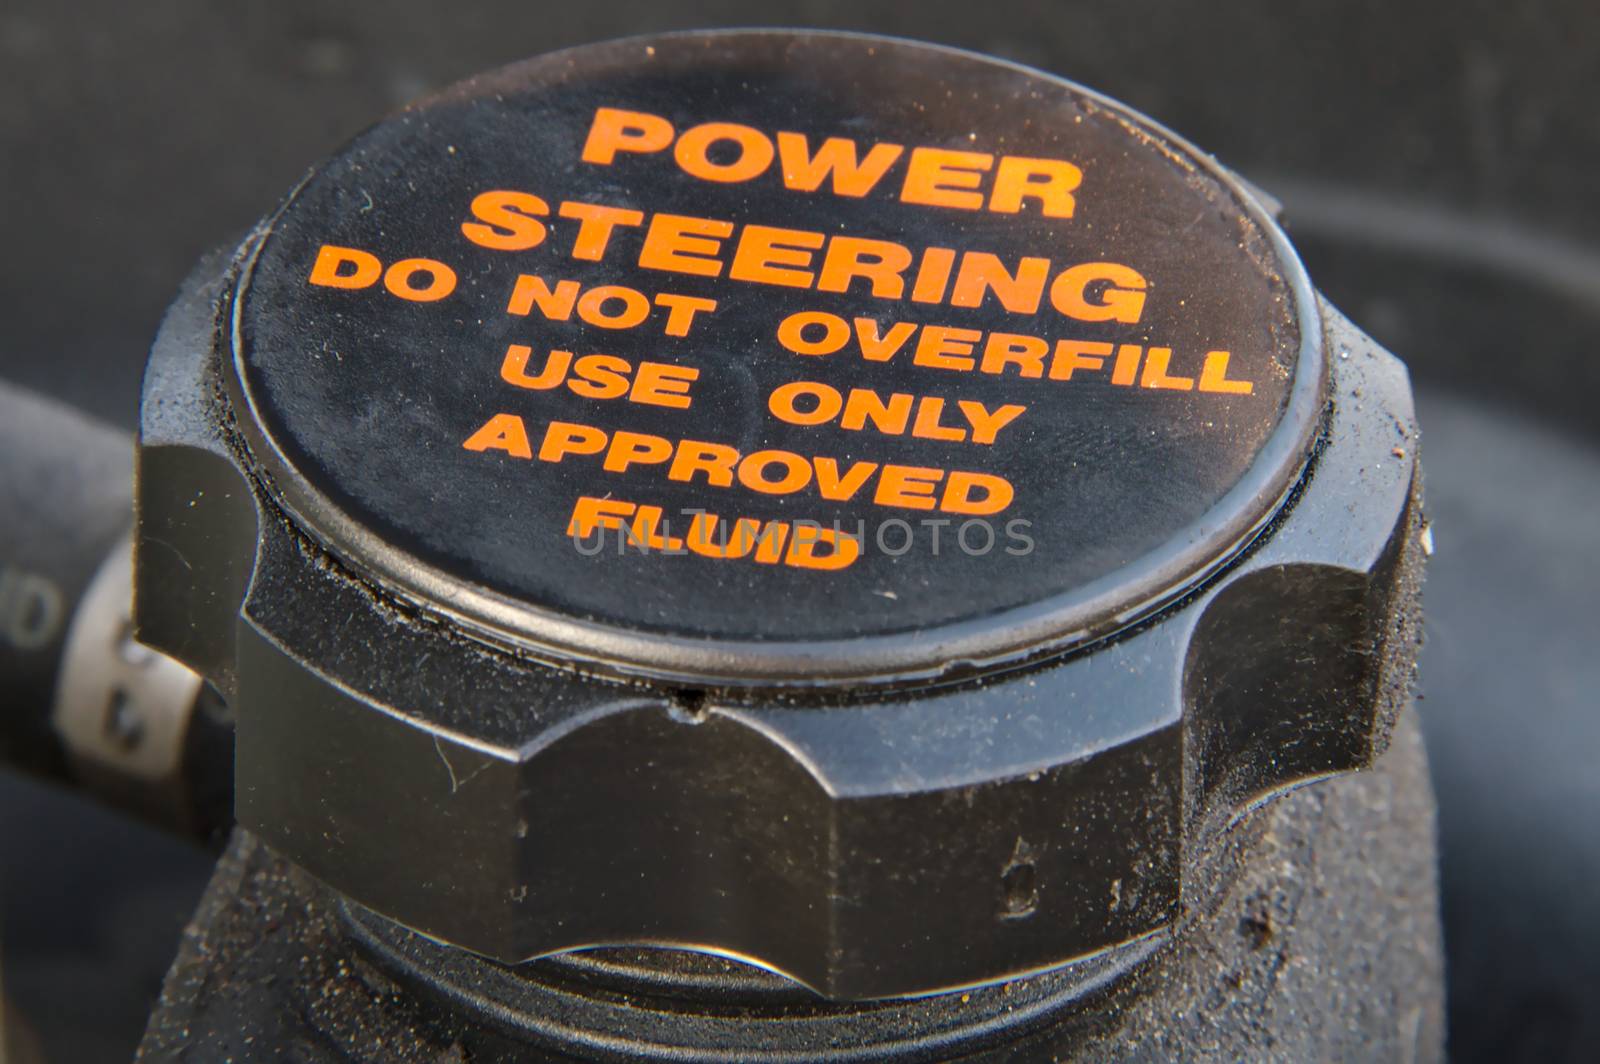 Closeup of a cap of a power steering oil tank. Do not overfill and use approved fluid only warning text.